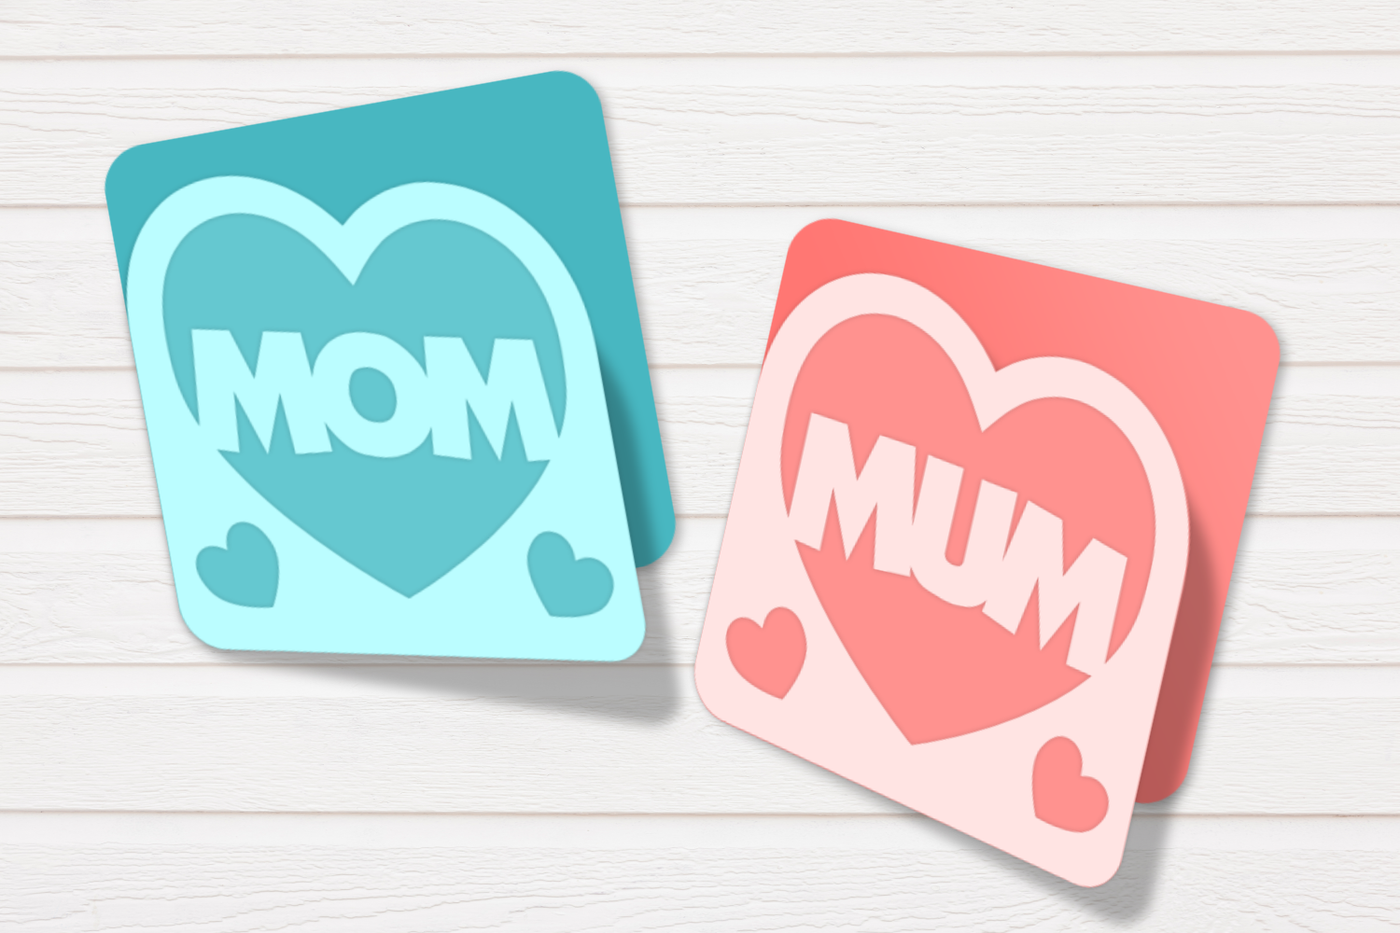 Mom and mum heart card designs